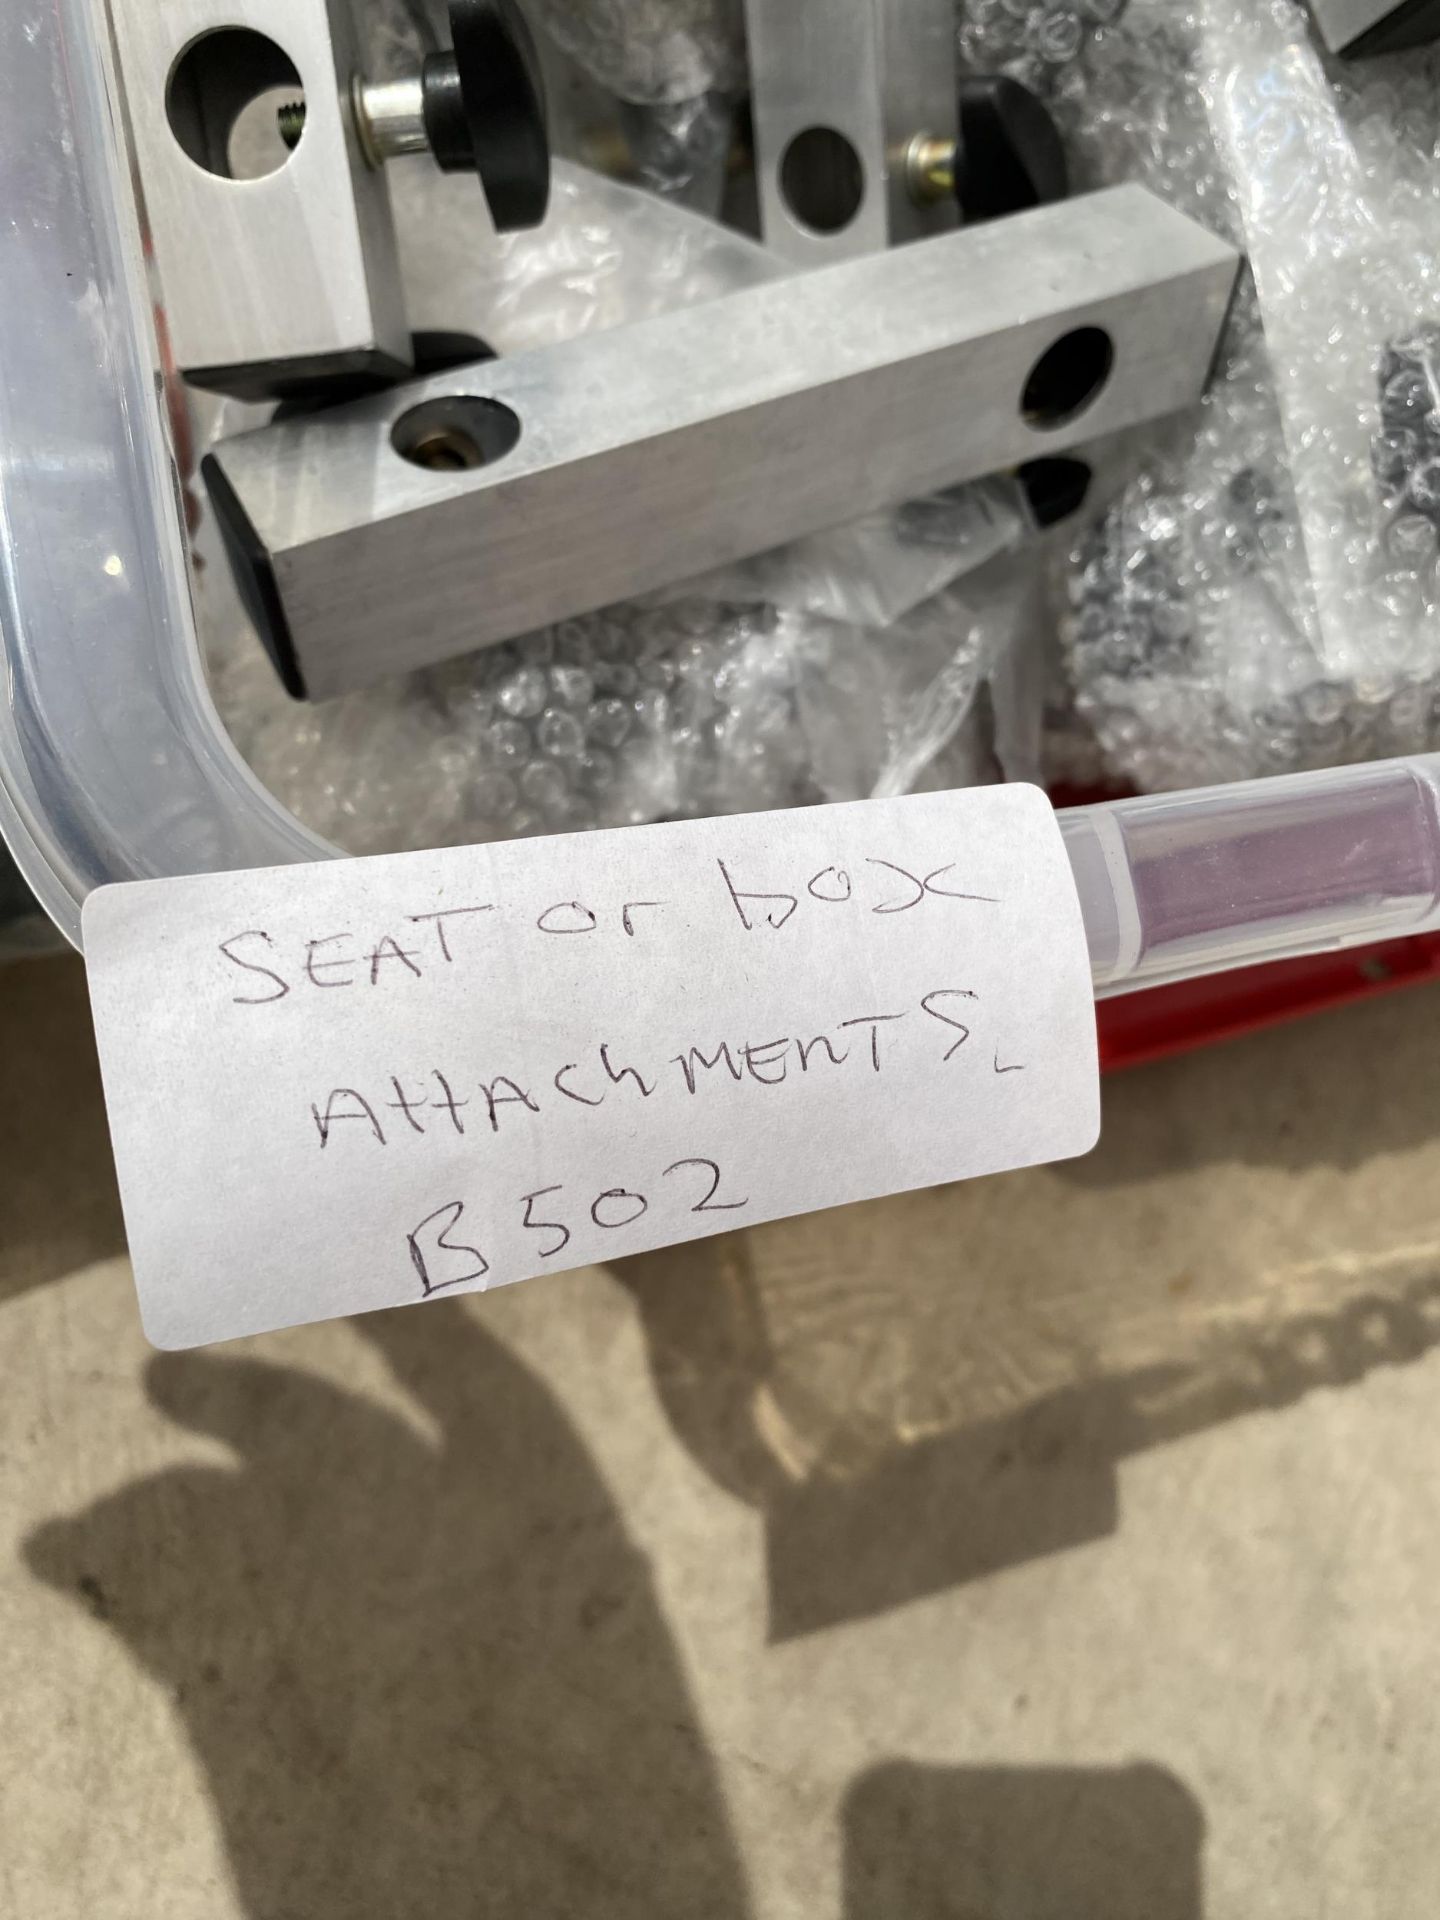 A BOX CONTAINING A LARGE NUMBER OF SEAT AND BOX ATTATCHMENTSACK (FROM A TACKLE SHOP CLEARANCE) - Image 3 of 3